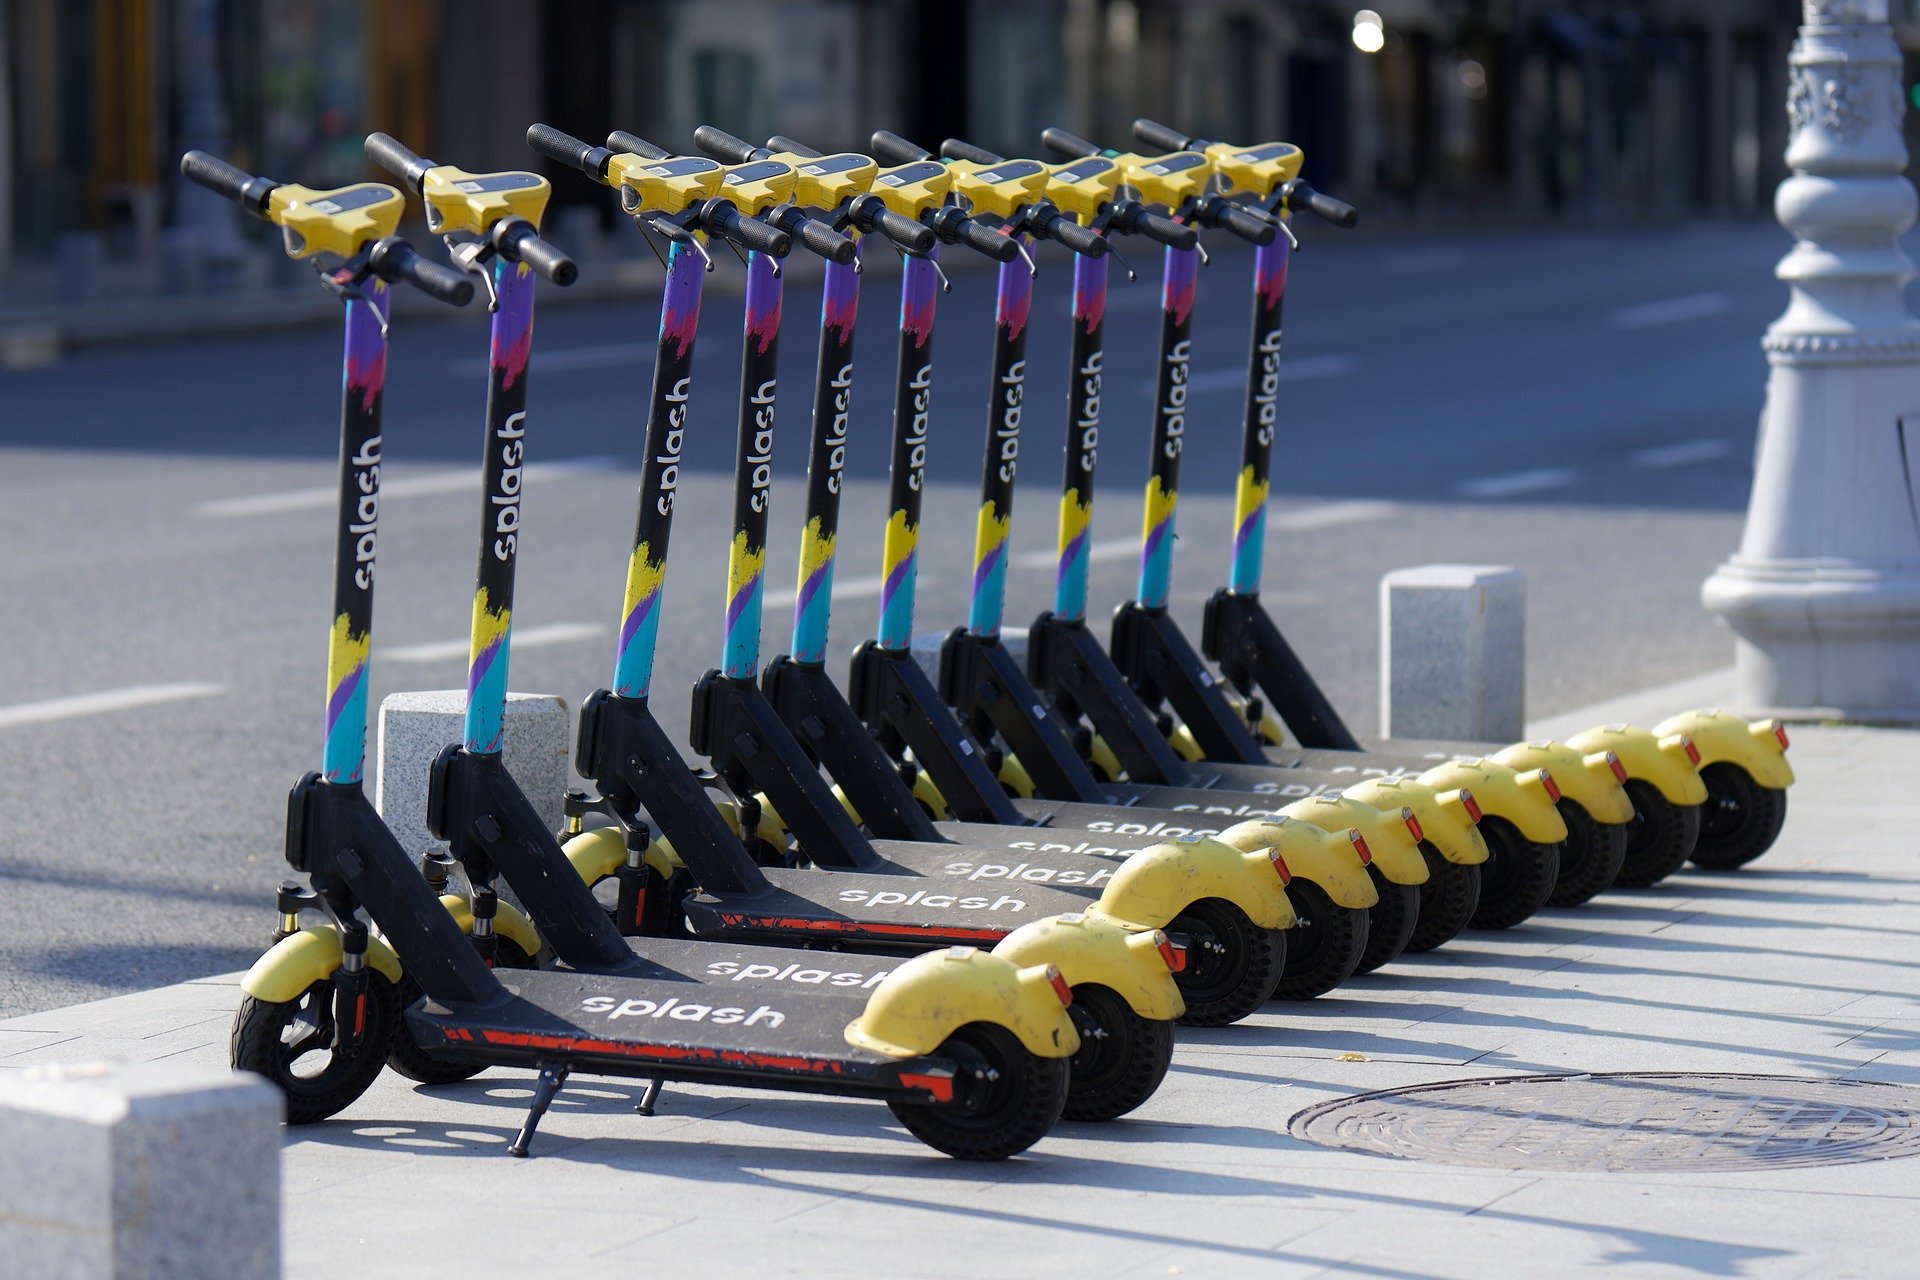 A row of electric scooters